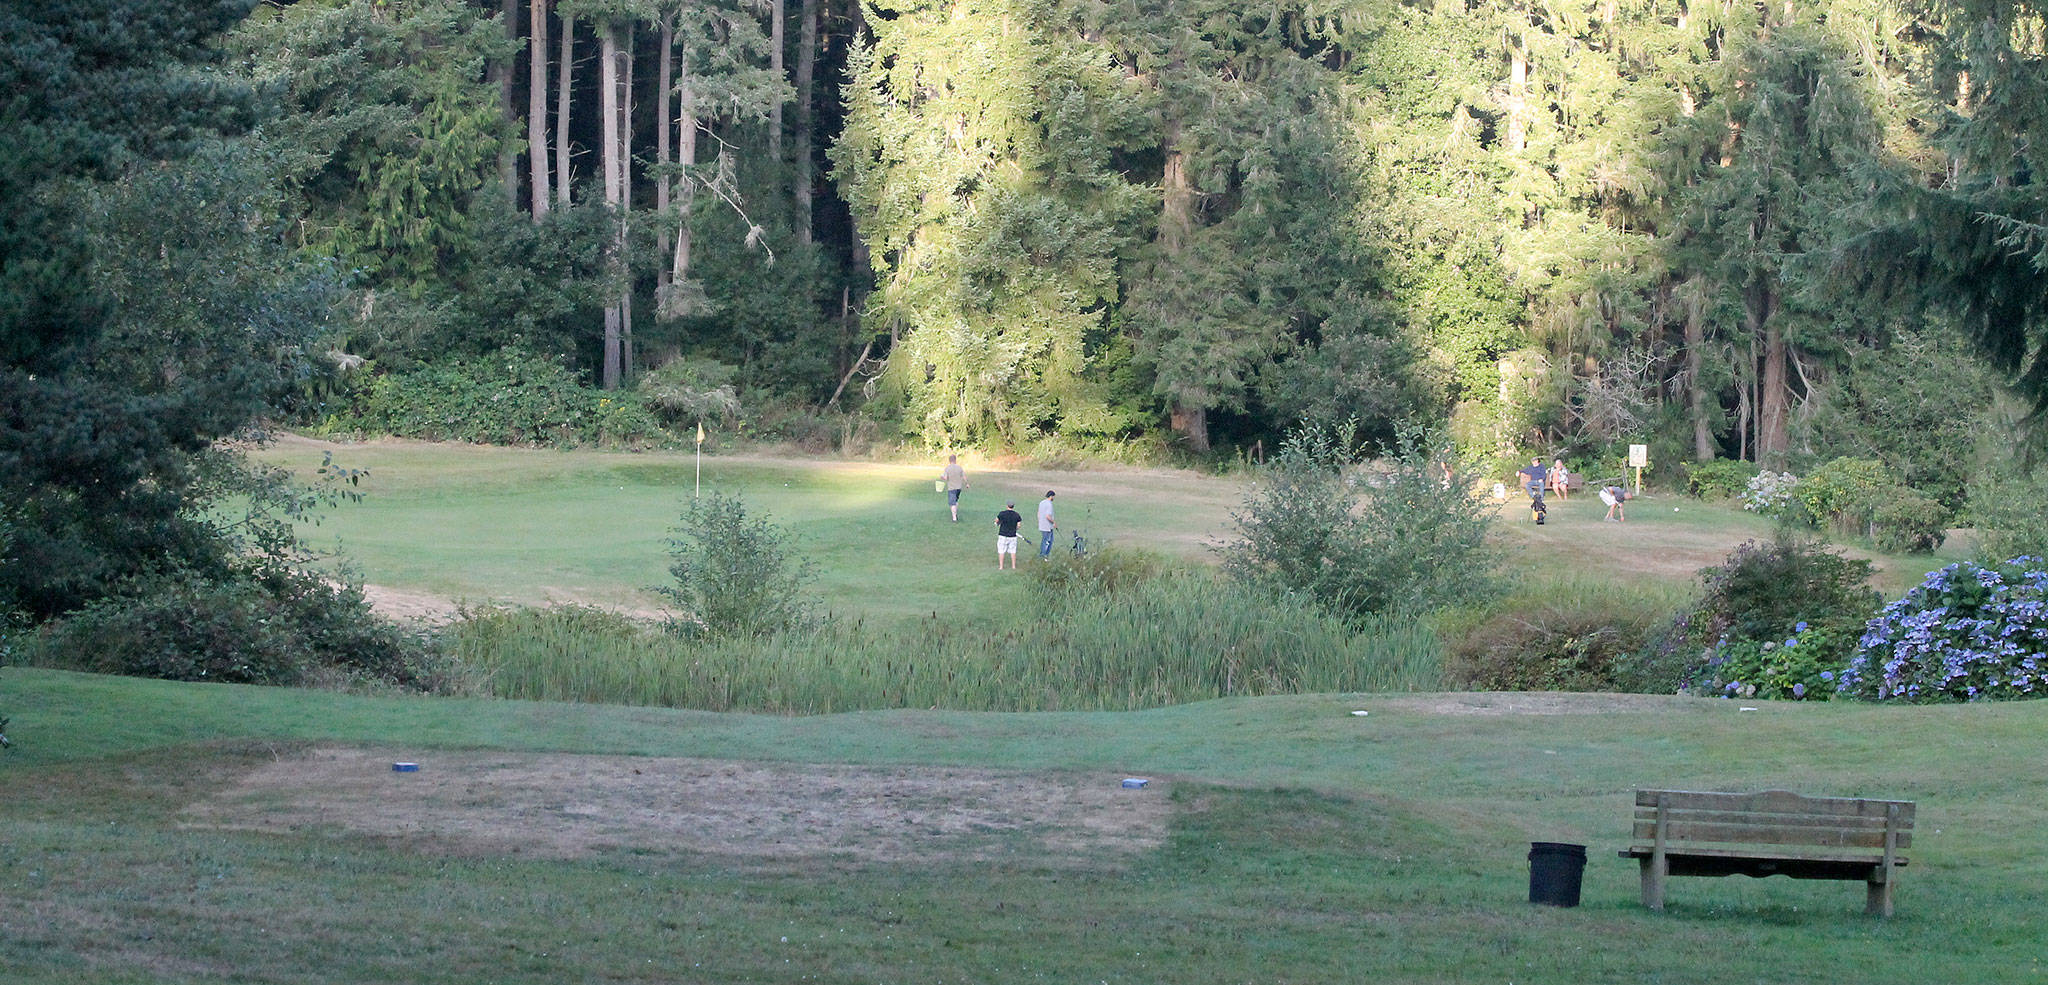 The Island Greens golf course, carved out of acres of old growth timber, hosted its final rounds of public golf Sunday. (Photo by Jim Waller/Whidbey News-Times)